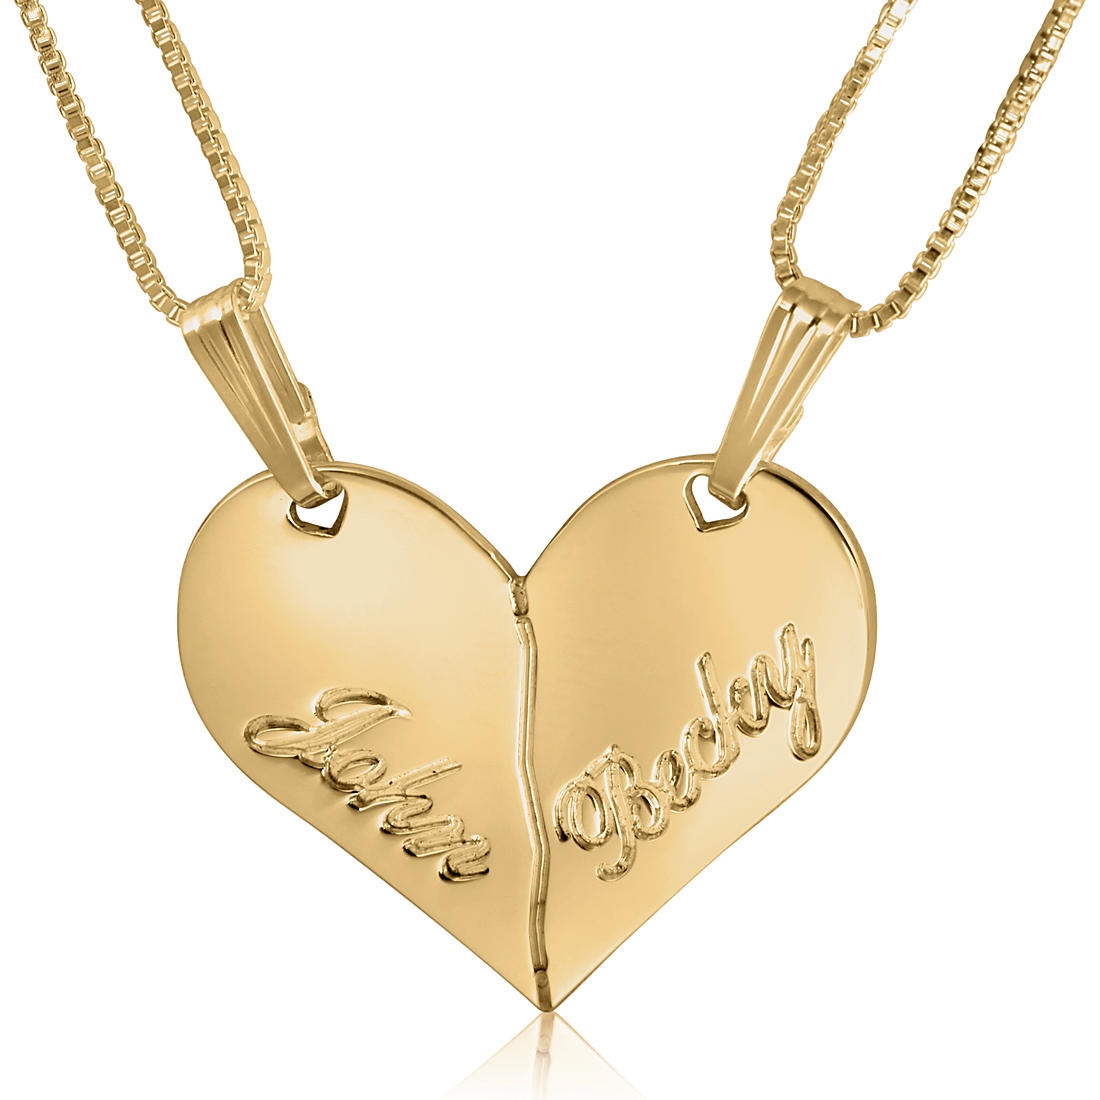 Broken Heart Name Necklaces, Engraved (2), 24k Gold Plated - 1